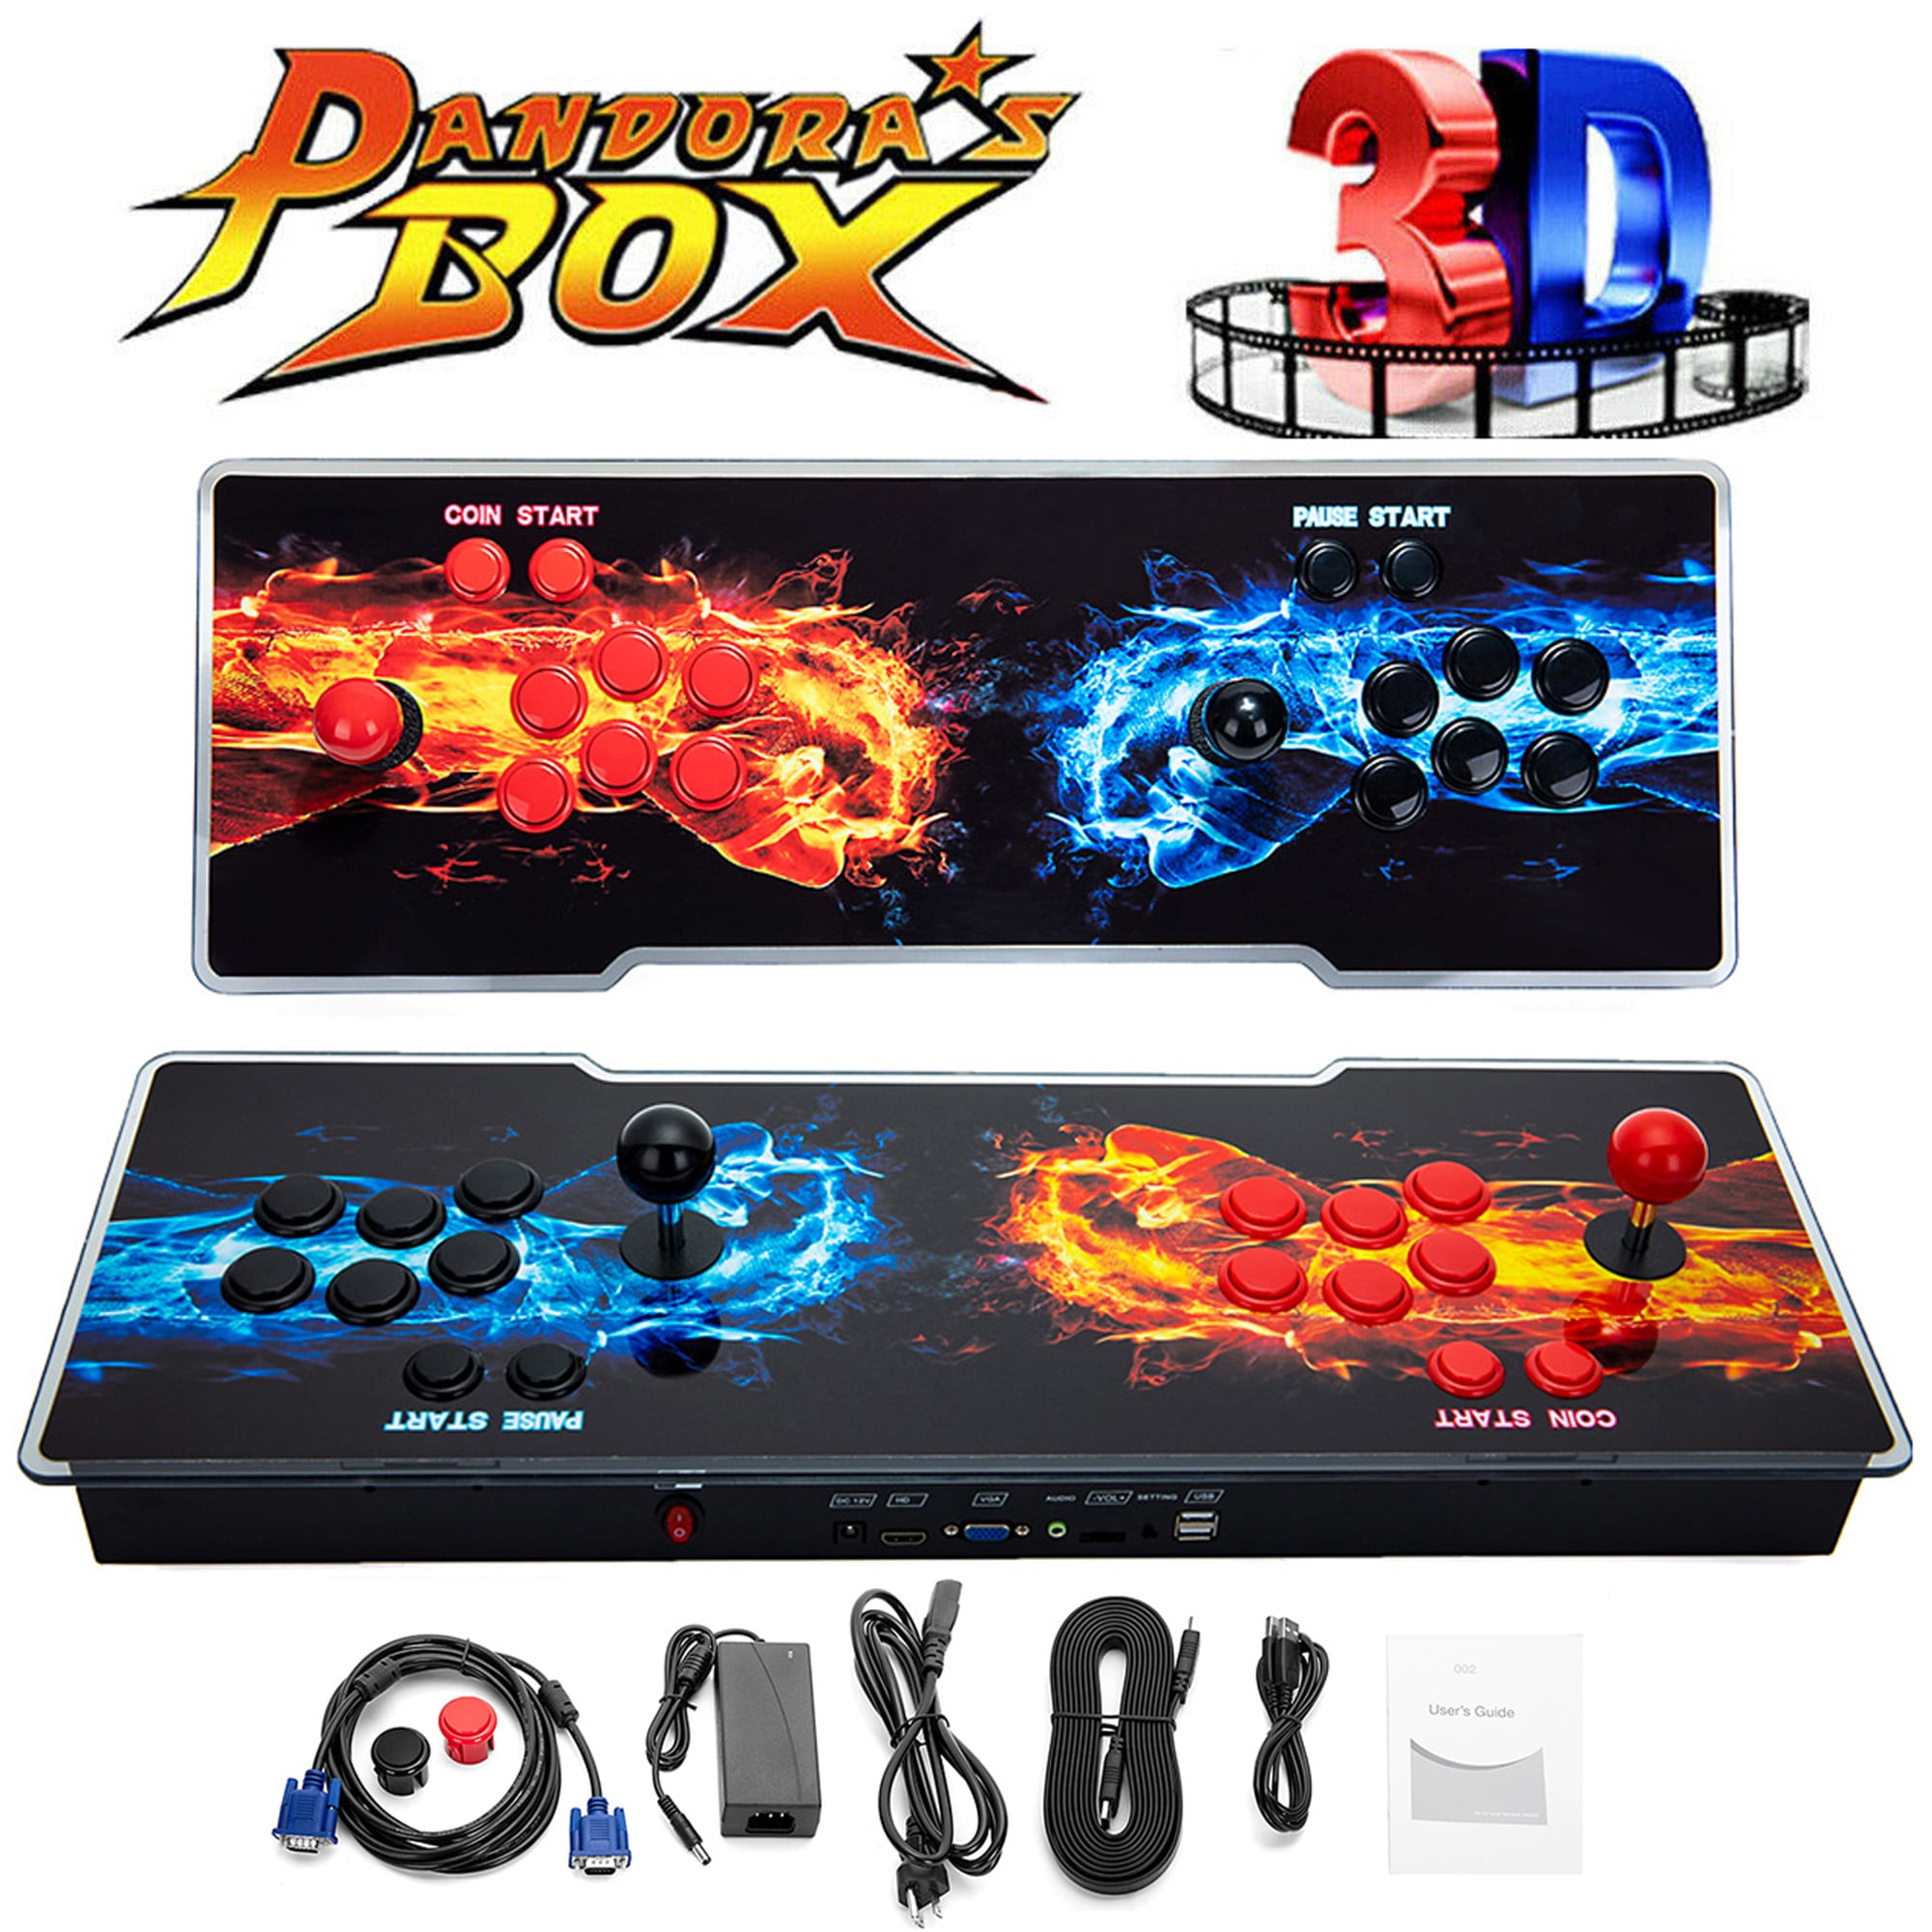 26800 Games in 1 Arcade Game Console ,Pandora Treasure 3D Double  Stick,26800 Classic Arcade Game,Search Games, Support 3D Games,Favorite  List, 4